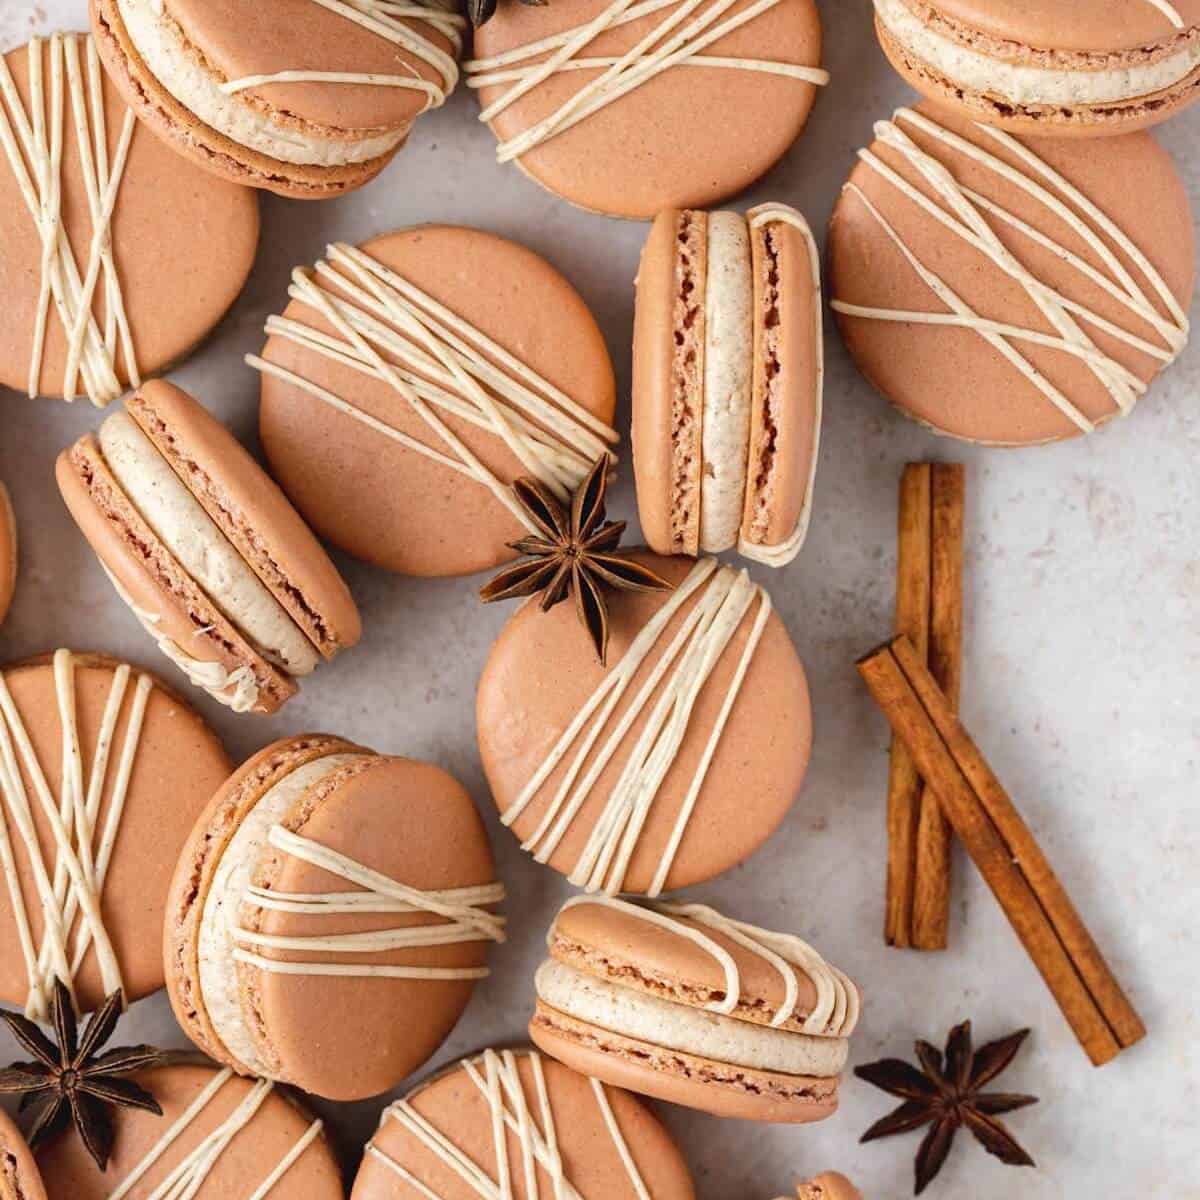 Several chai spice macarons with star anise and cinnamon on a surface.